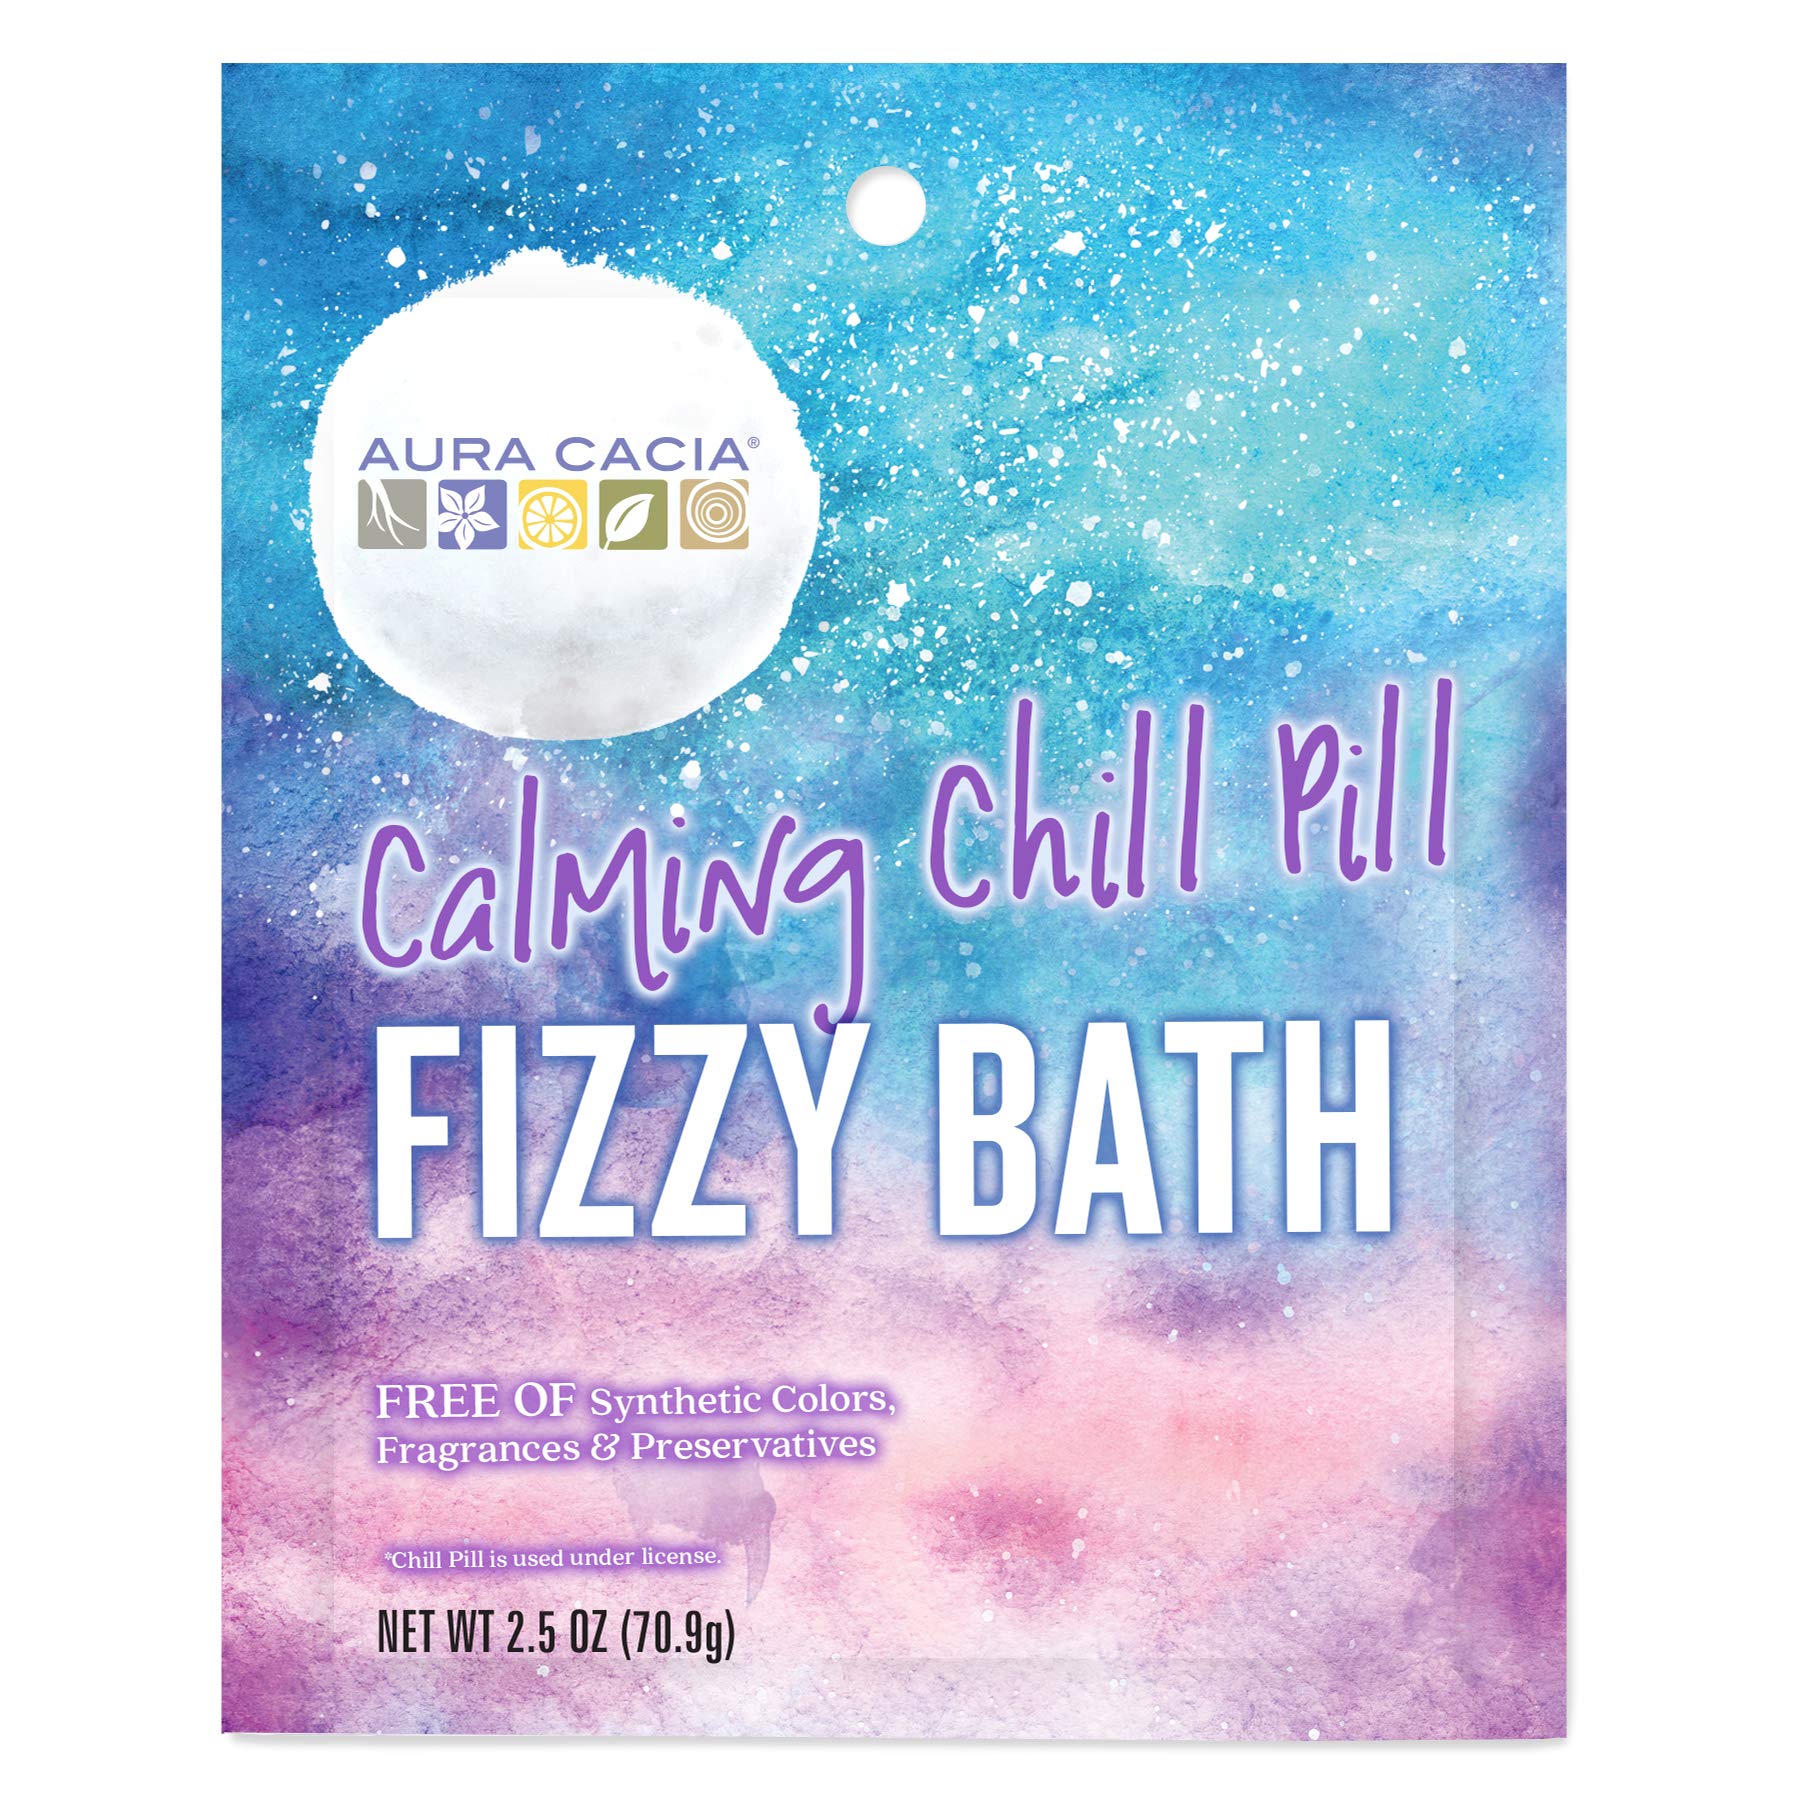 Aura Cacia Calming Chill Pill Fizzy Bath | GC/MS Tested for Purity | 2.5 oz (70.9g)